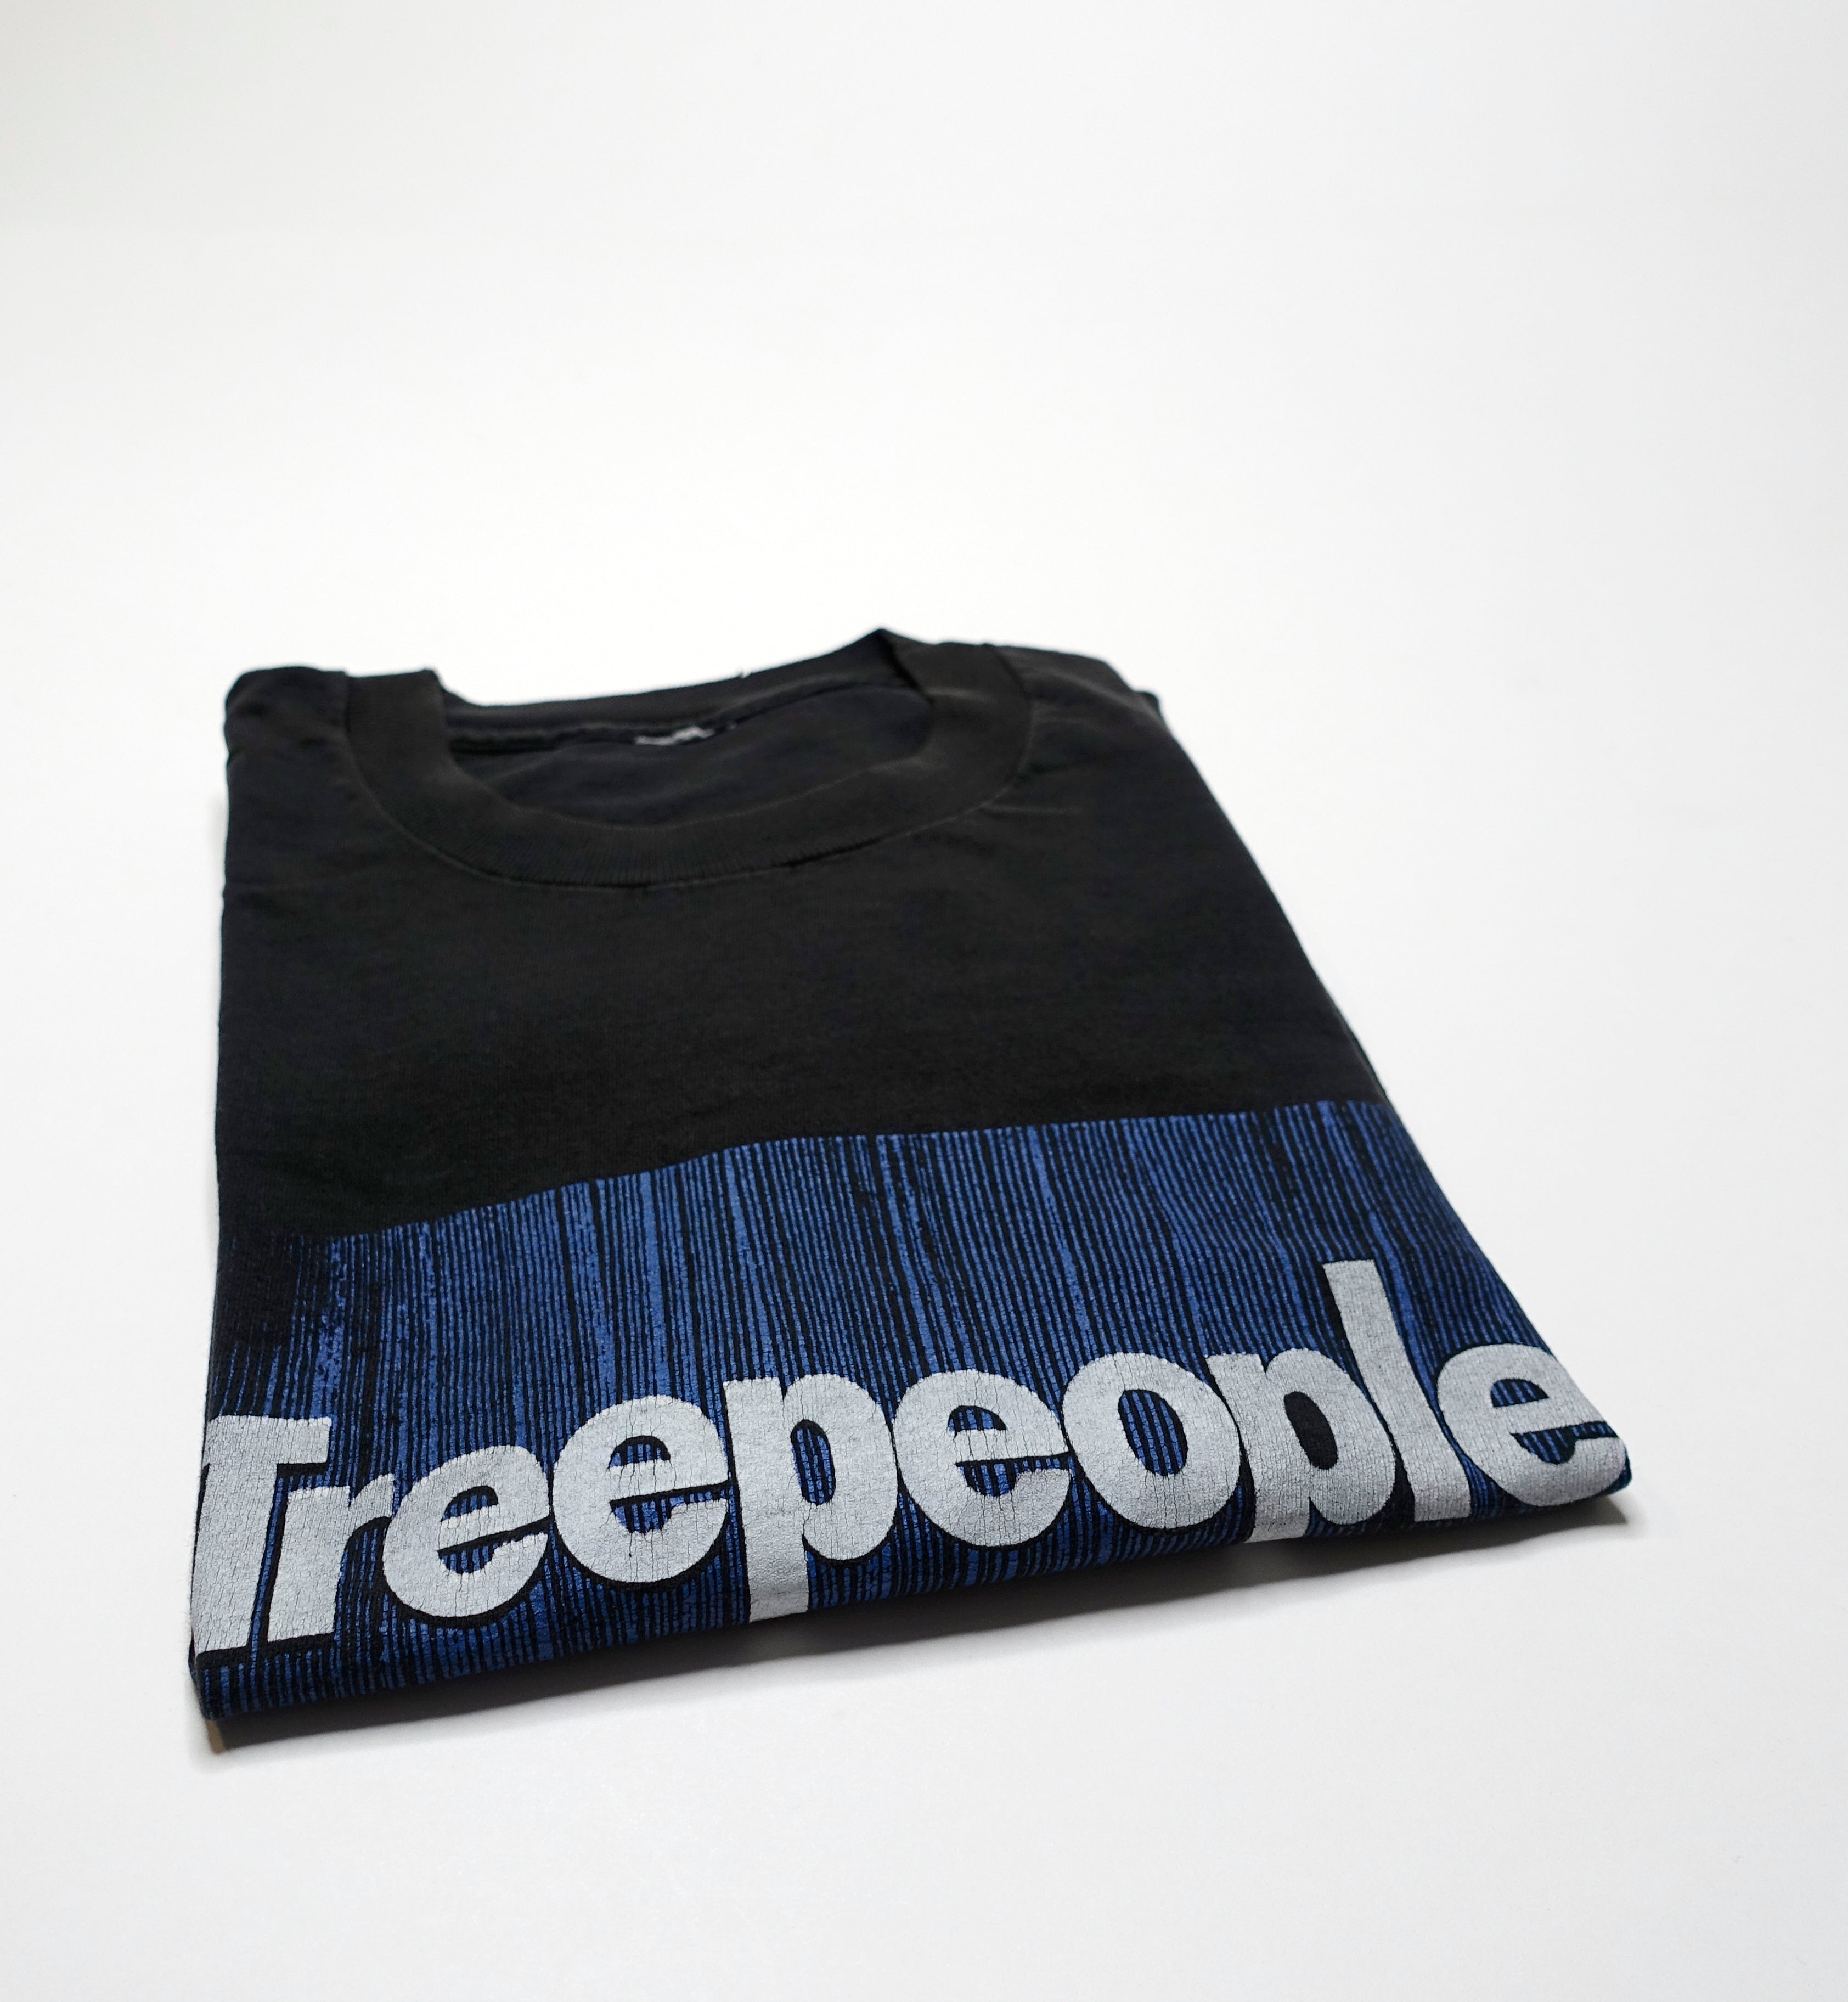 Treepeople - Person & Tree 1 Color 90's Tour Shirt Size XL